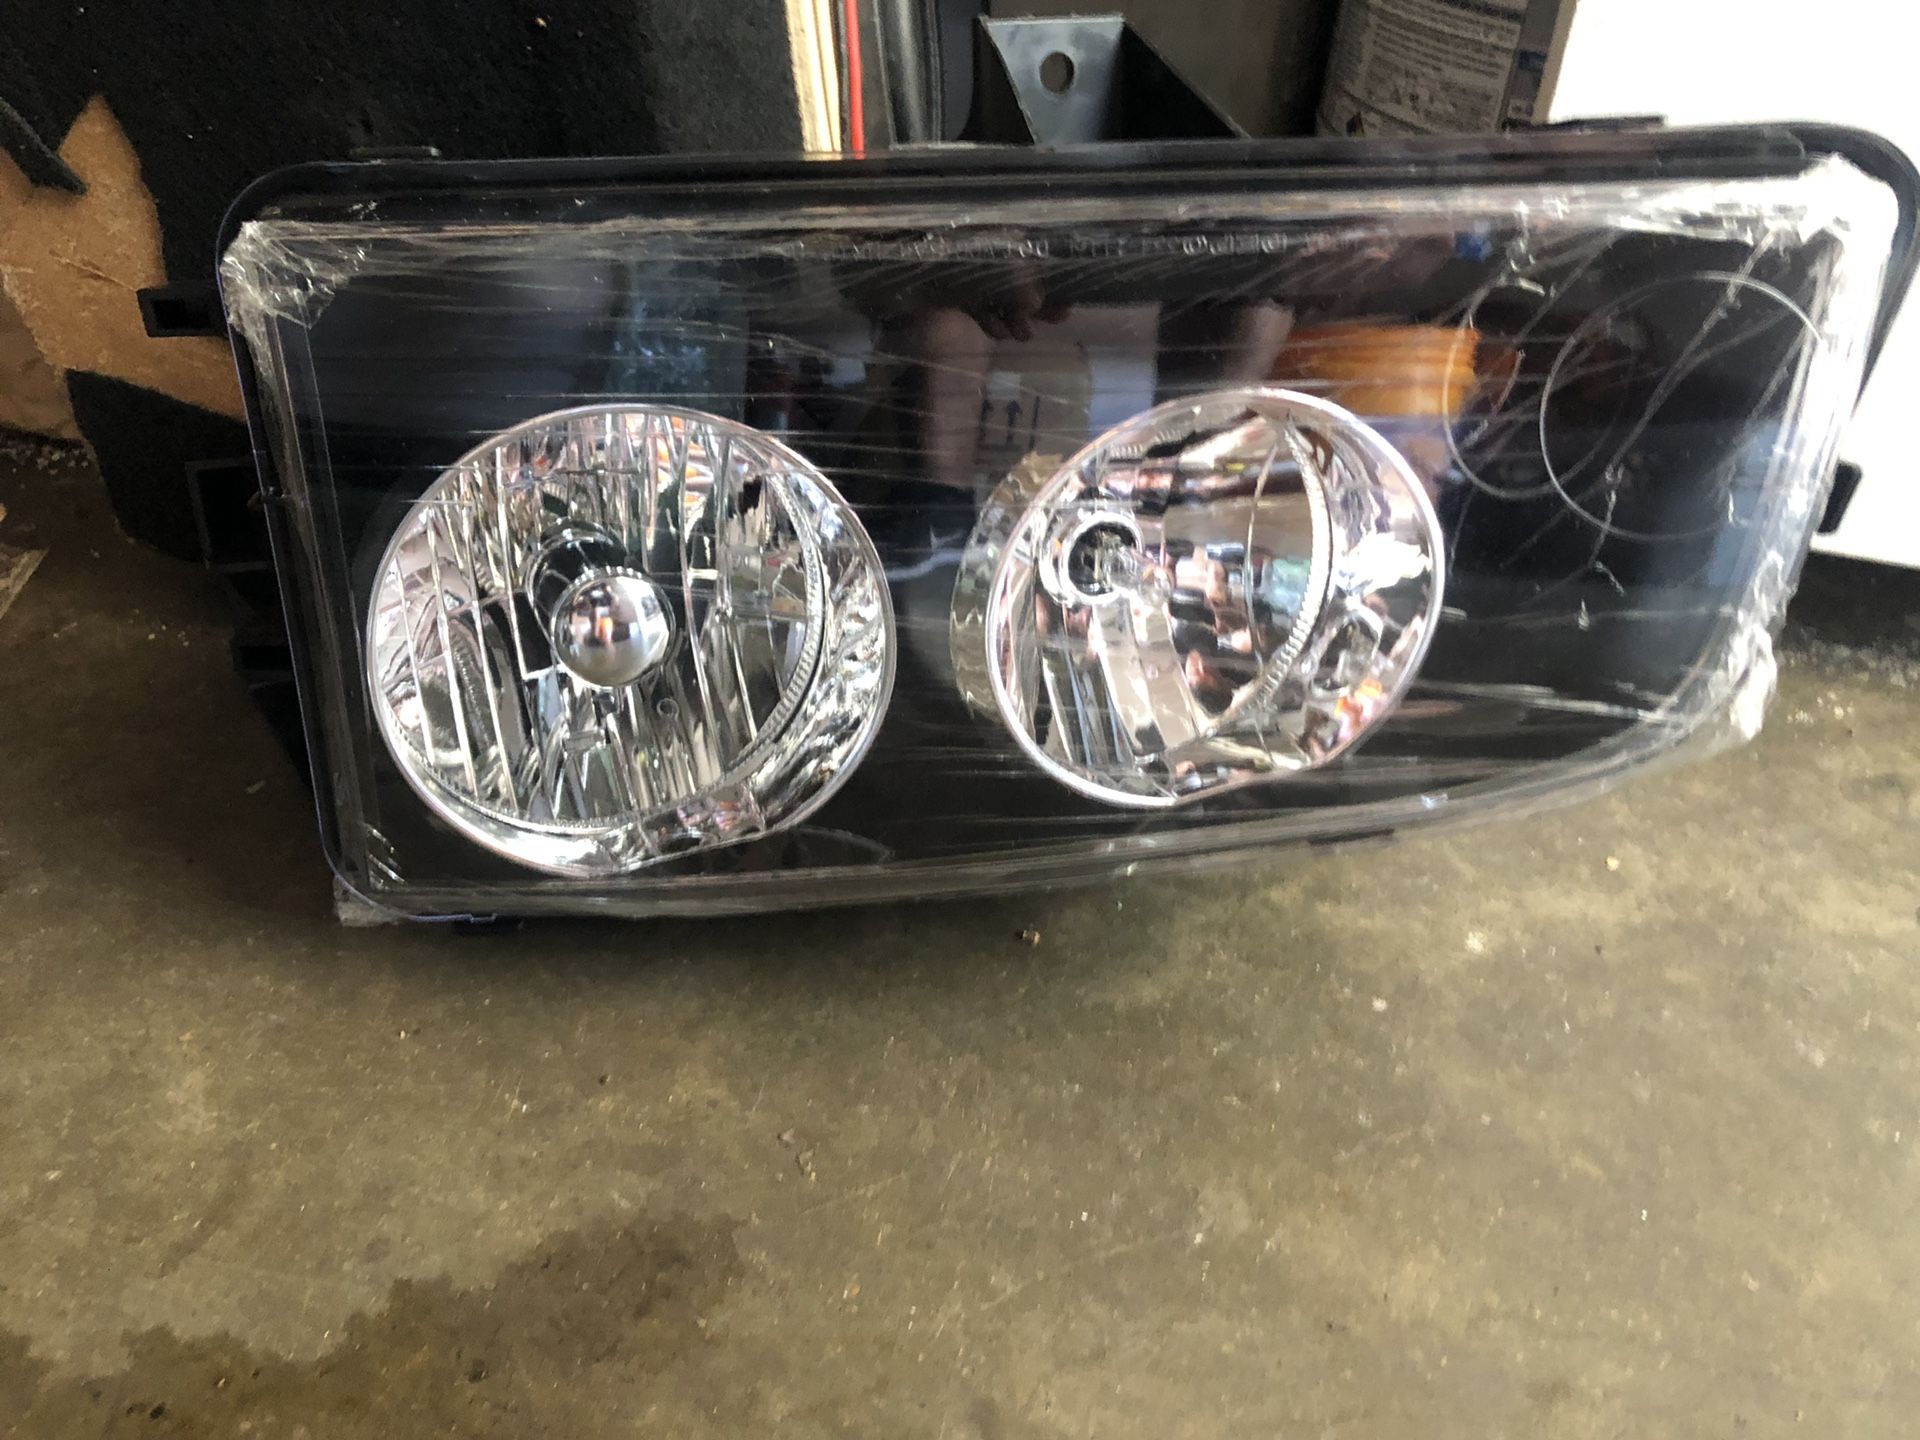 2010 dodge charger headlight. New. Never used